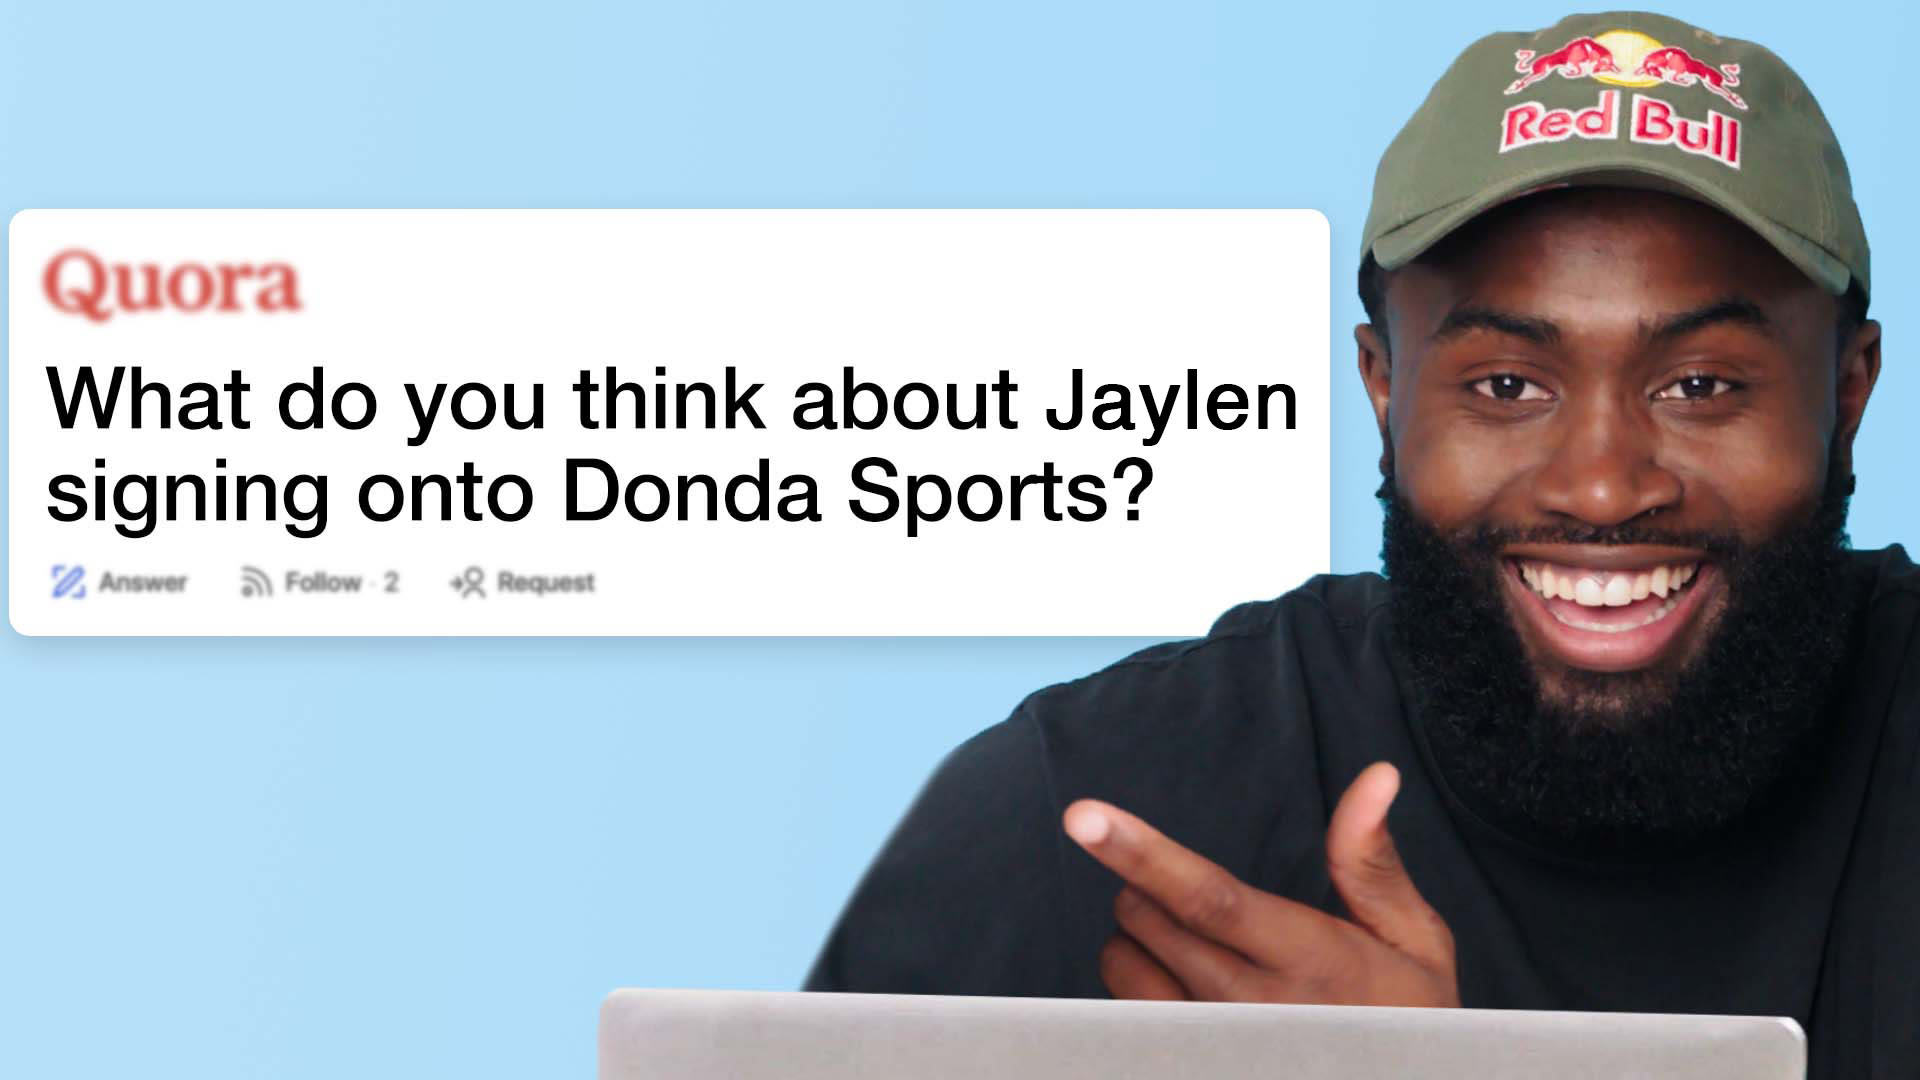 Jaylen Brown Becomes The First Athlete To Sign With Donda Sports, TrustyShops